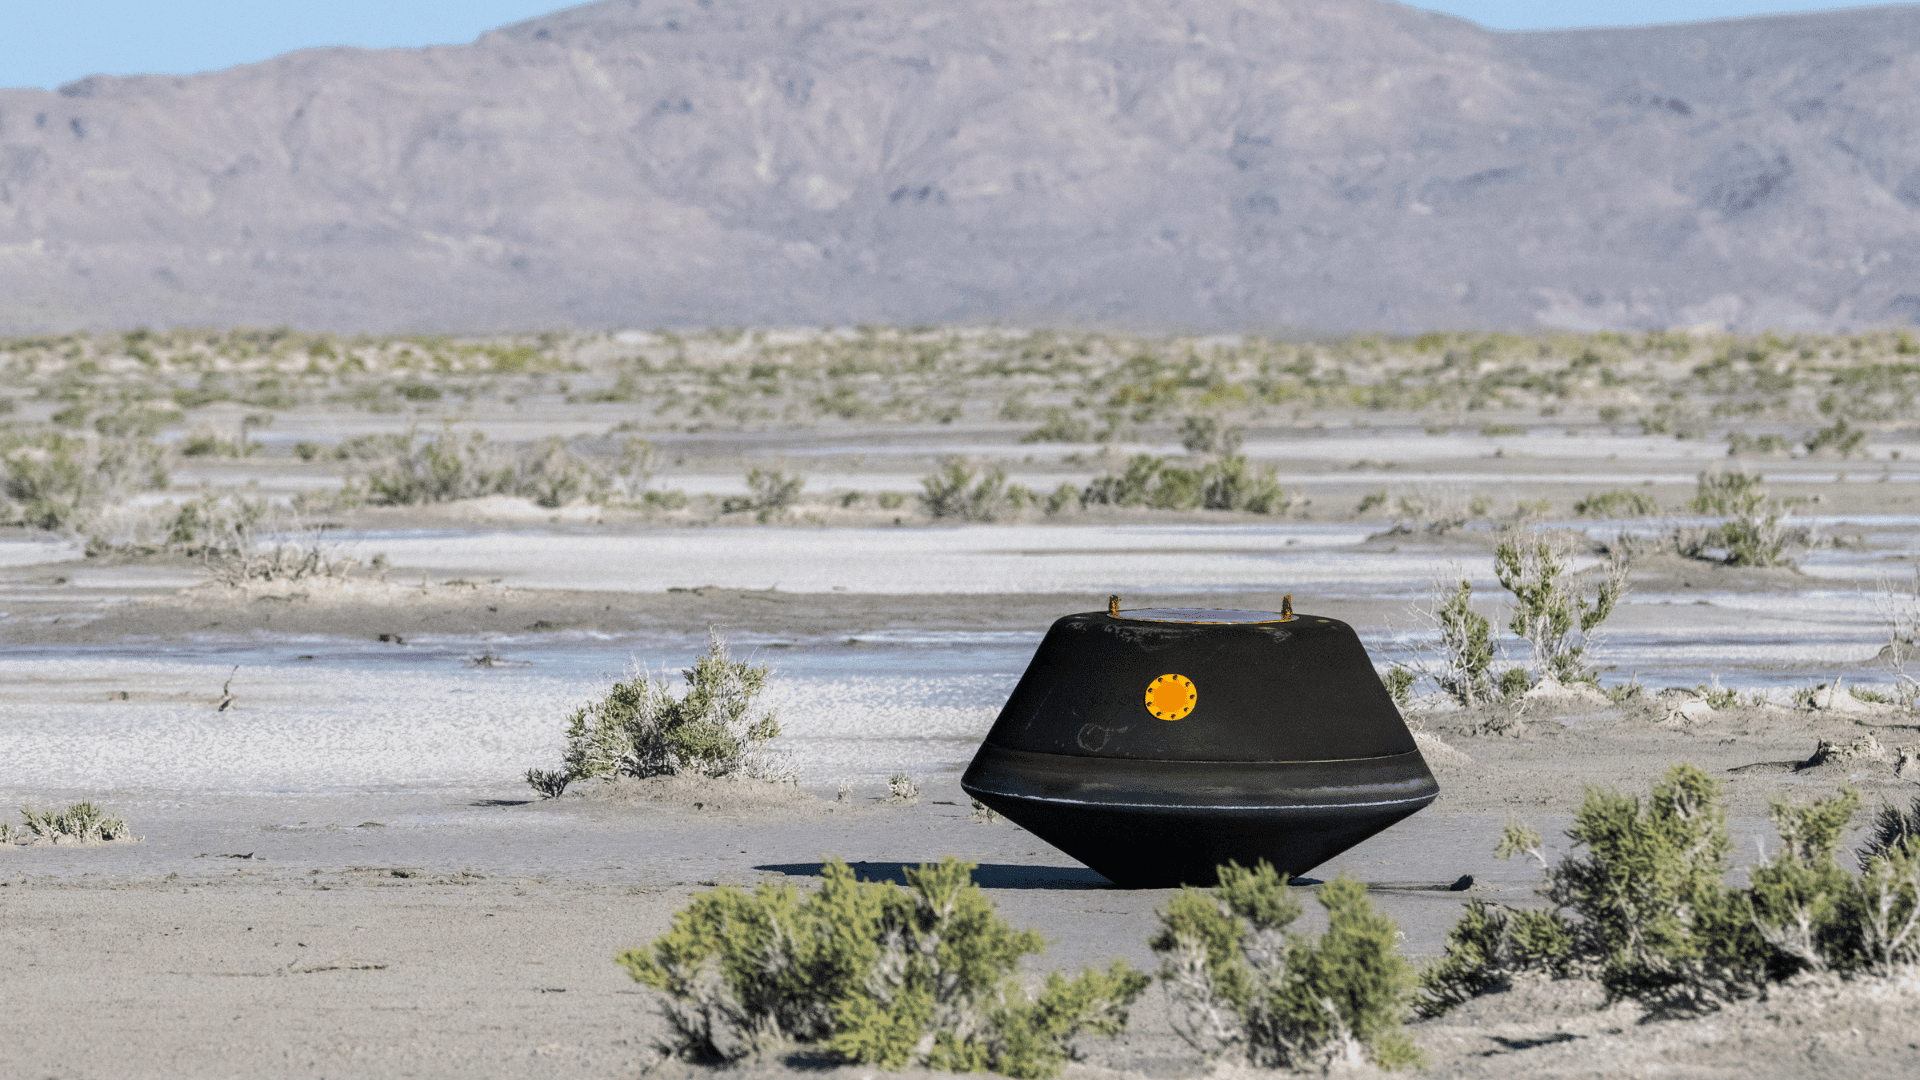 The sample return capsule from NASA’s OSIRIS-REx mission shortly after touching down in the desert on Sunday, Sept. 24, 2023